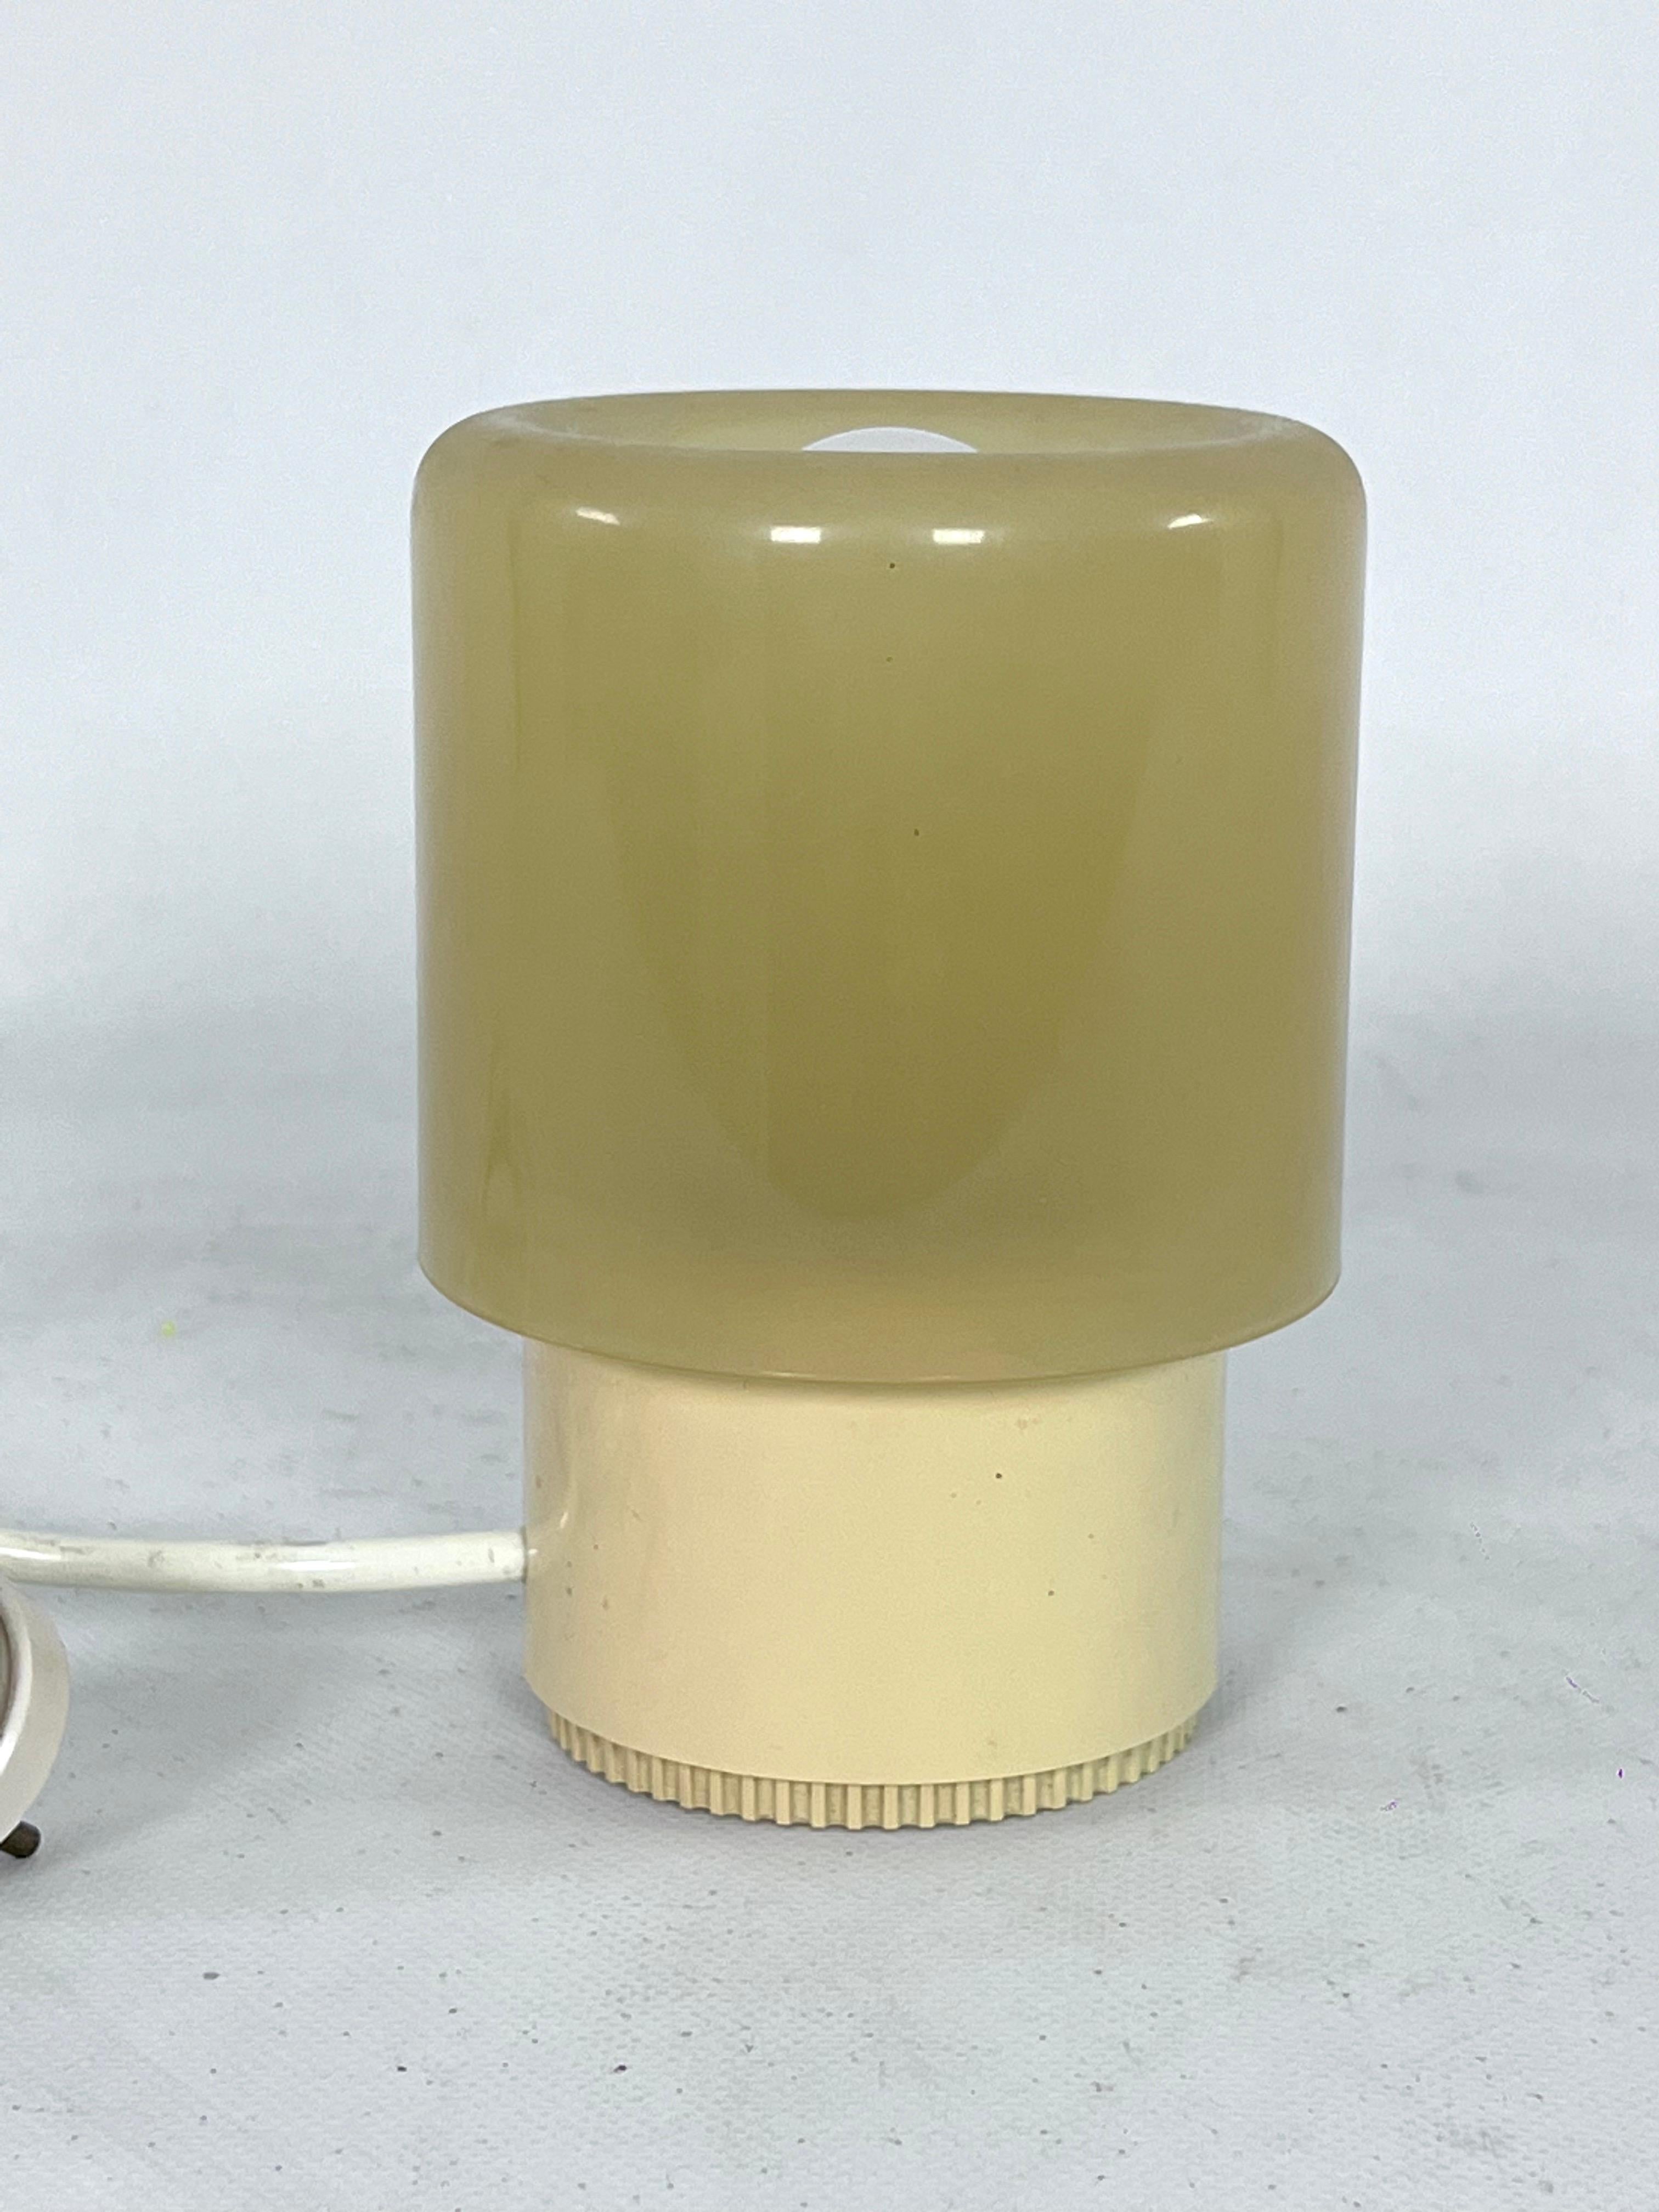 Good vintage condition with normal trace of age and use for this first serie of Tic Tac desk lamp, designed by Giotto Stoppino and produced by Kartell during the 70s. Full working with EU standard, adaptable on demand for USA standard.